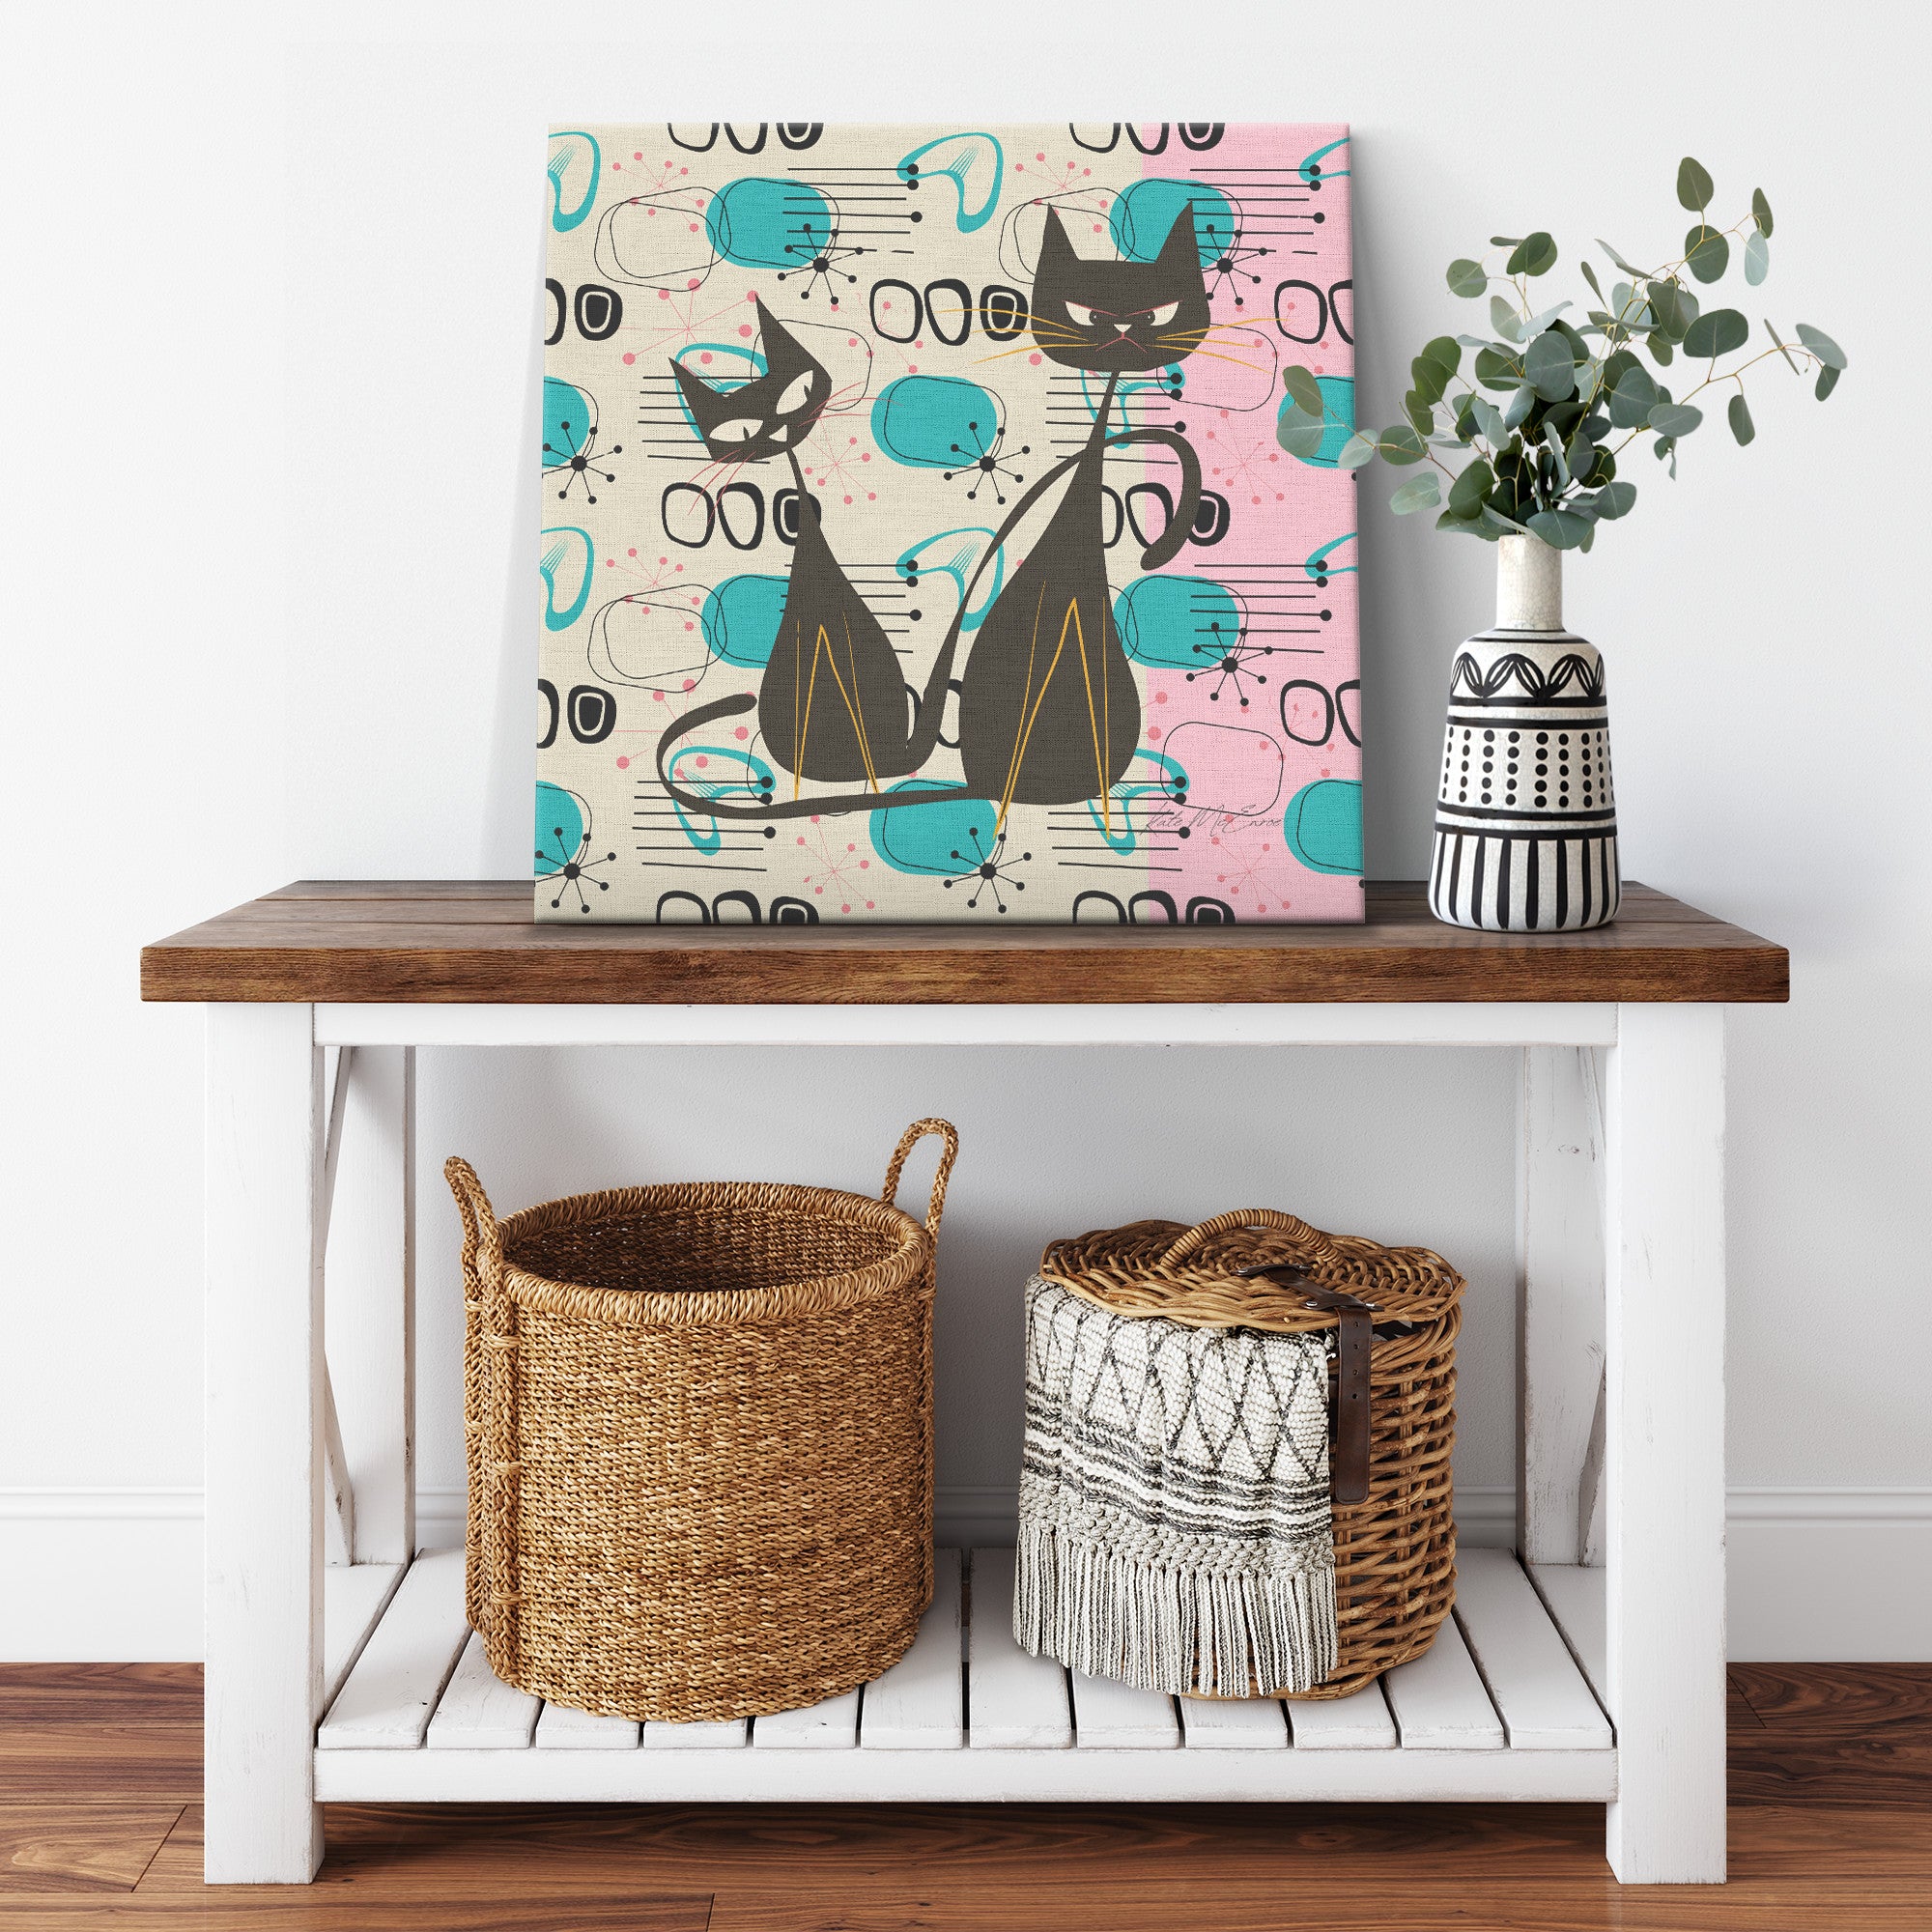 Curious Whiskers &amp; Grumpy Paws: Atomic Cats Canvas Art, Mid-Century Modern Retro Wall Decor